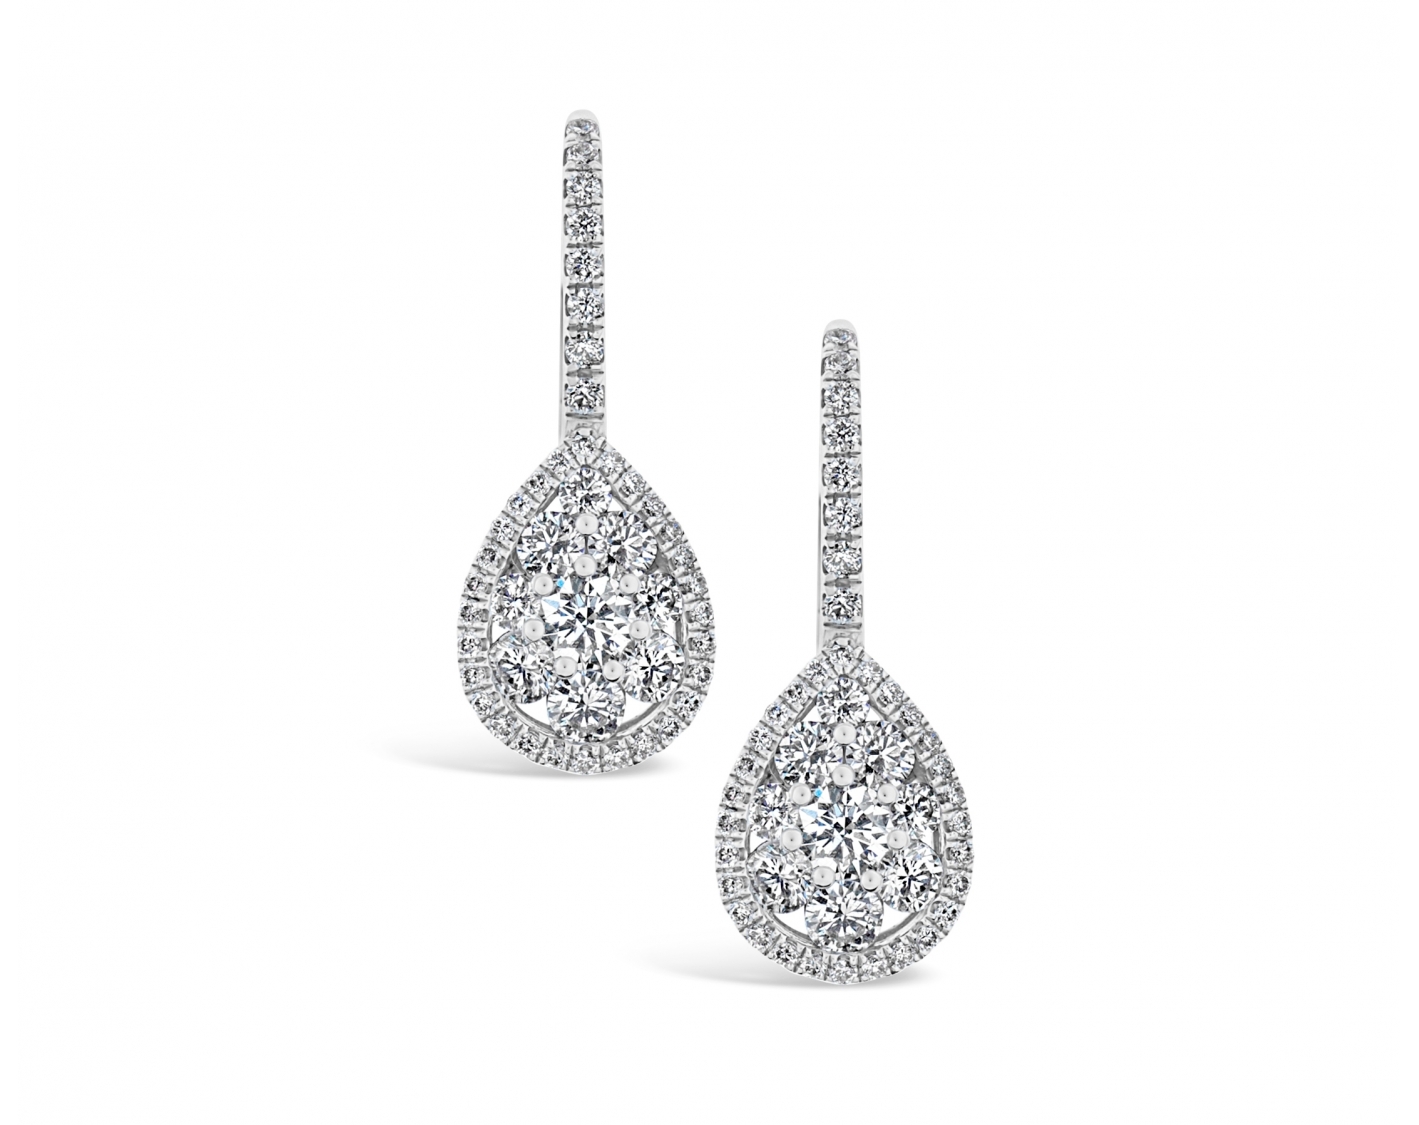 18k white gold pear shaped illusion set diamond earrings with round upstones Photos & images